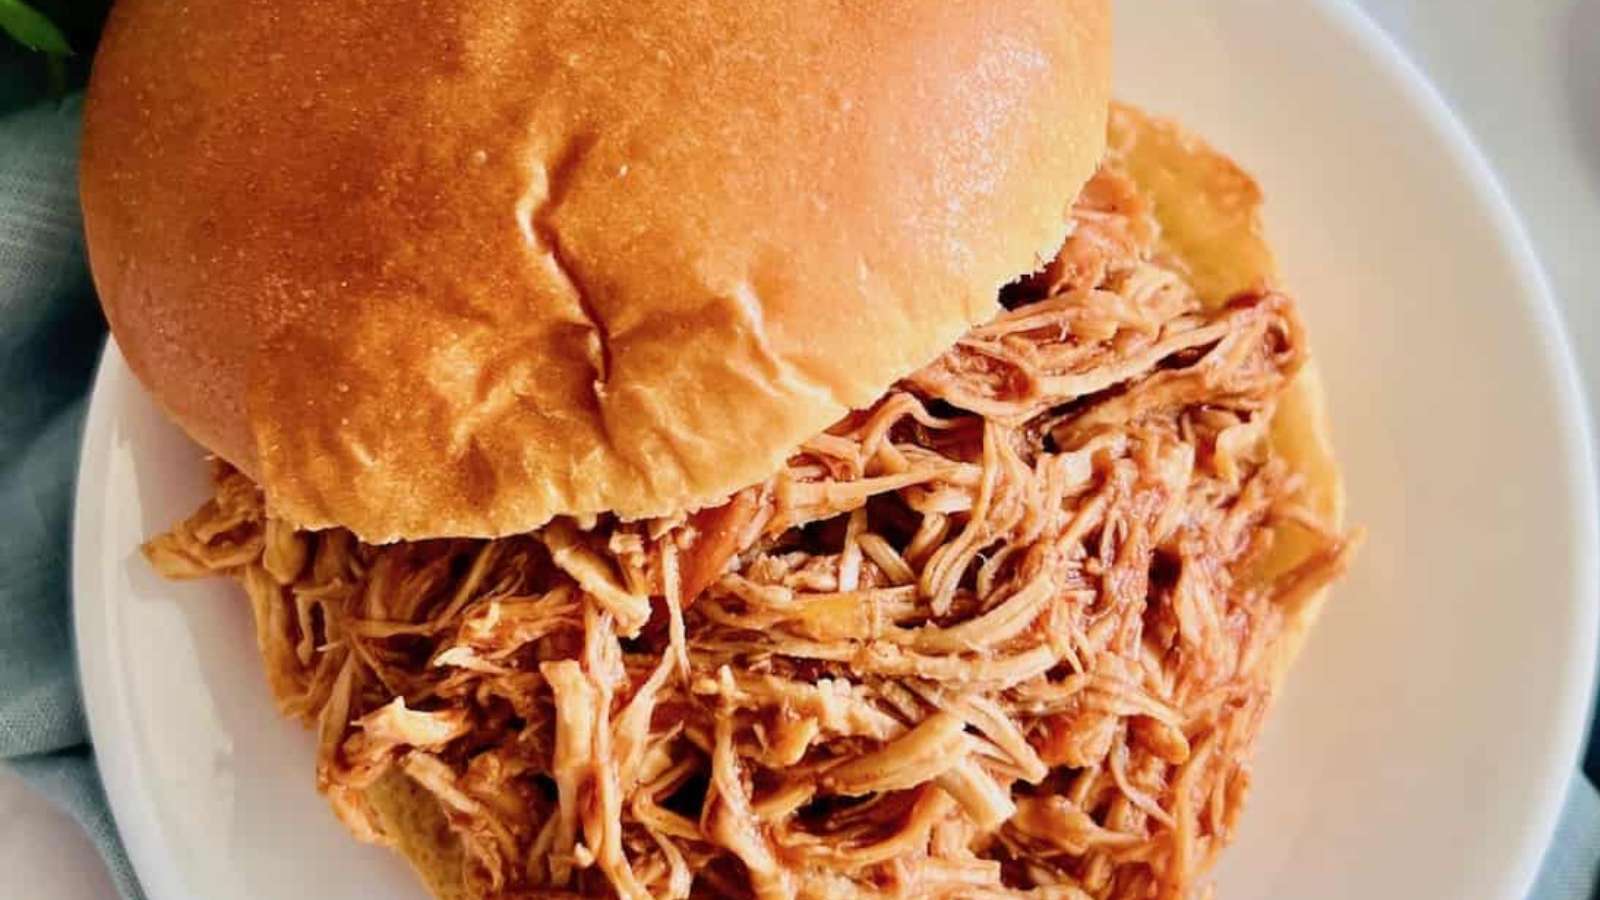 A pulled pork sandwich on a white plate.